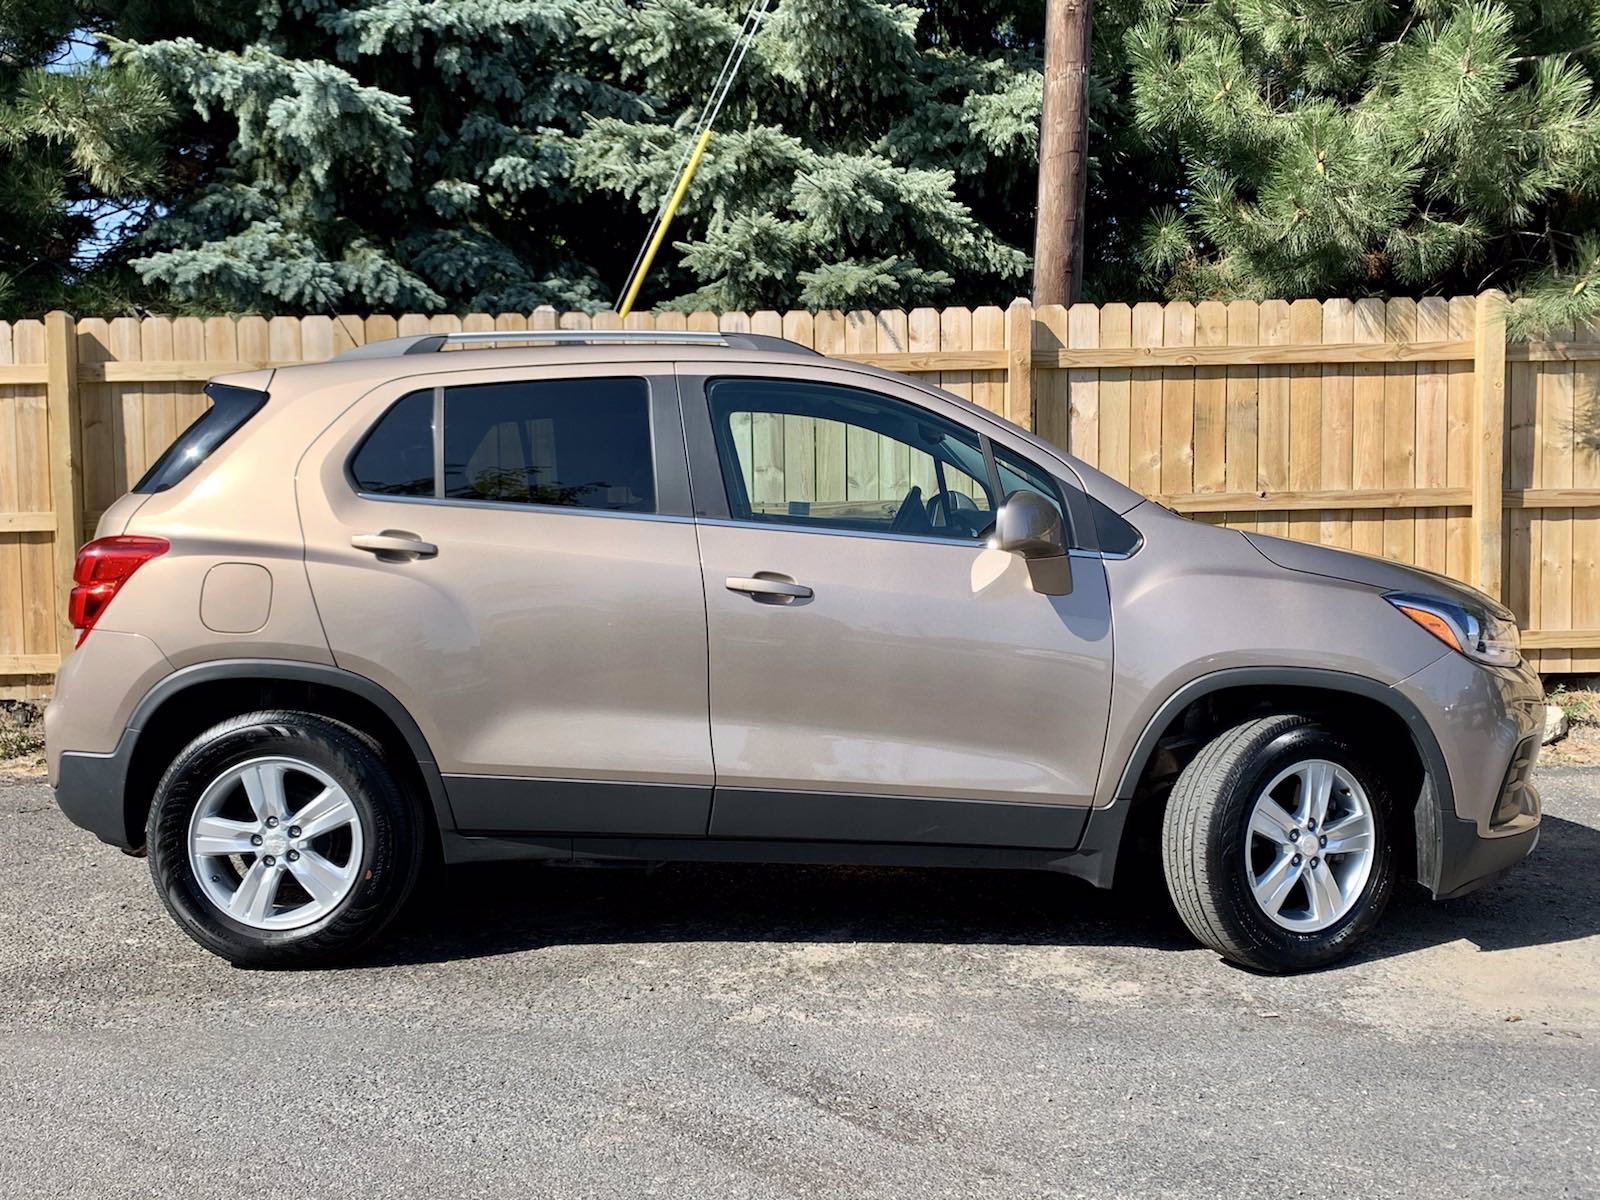 2018 chevrolet trax for sale